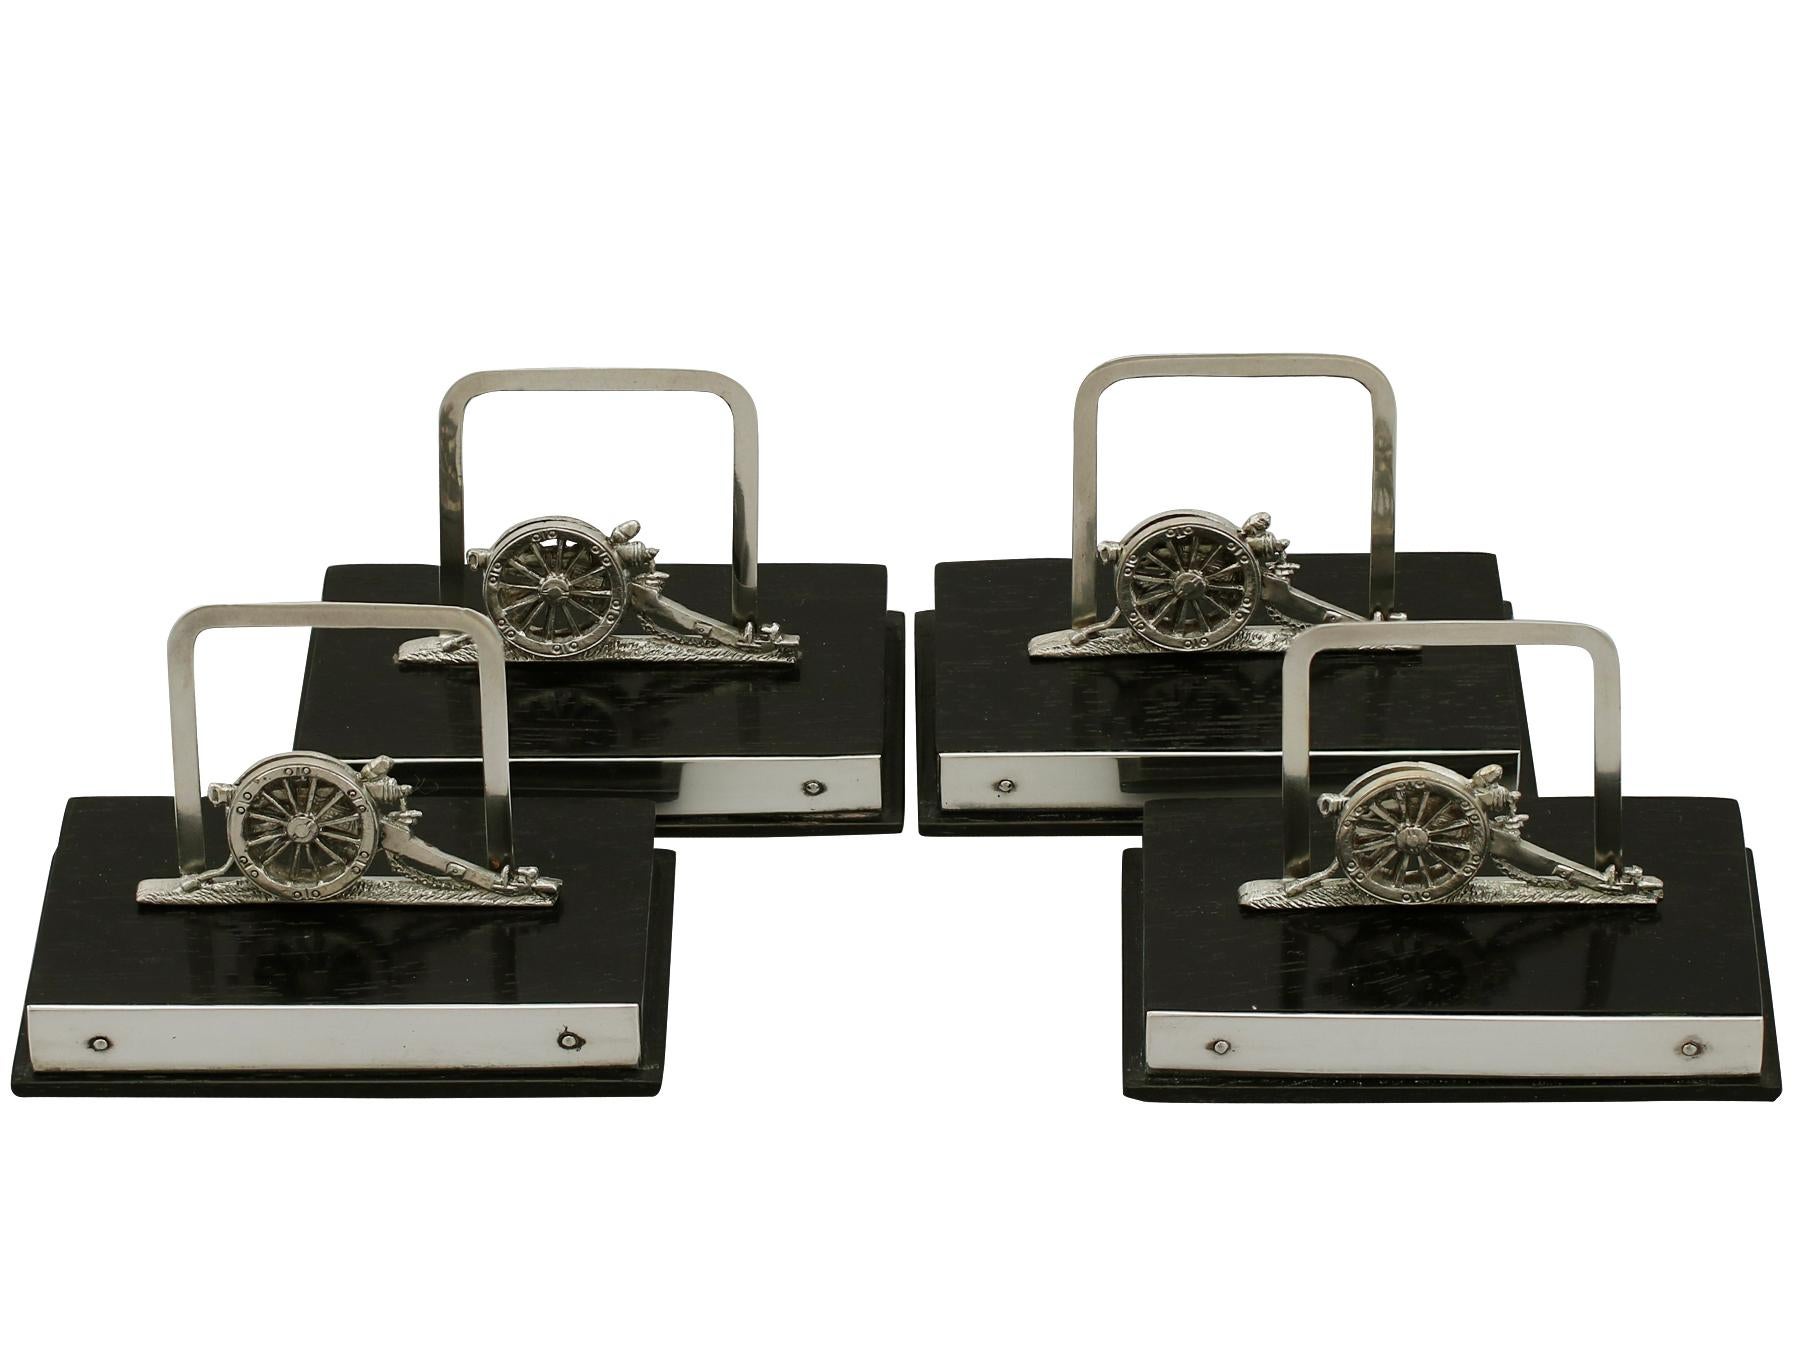 A fine and impressive set of four antique George V English sterling silver and wood menu holders in the form of a single barrelled cannon - boxed; an addition to our dining silverware collection.

These fine George V sterling silver menu holders